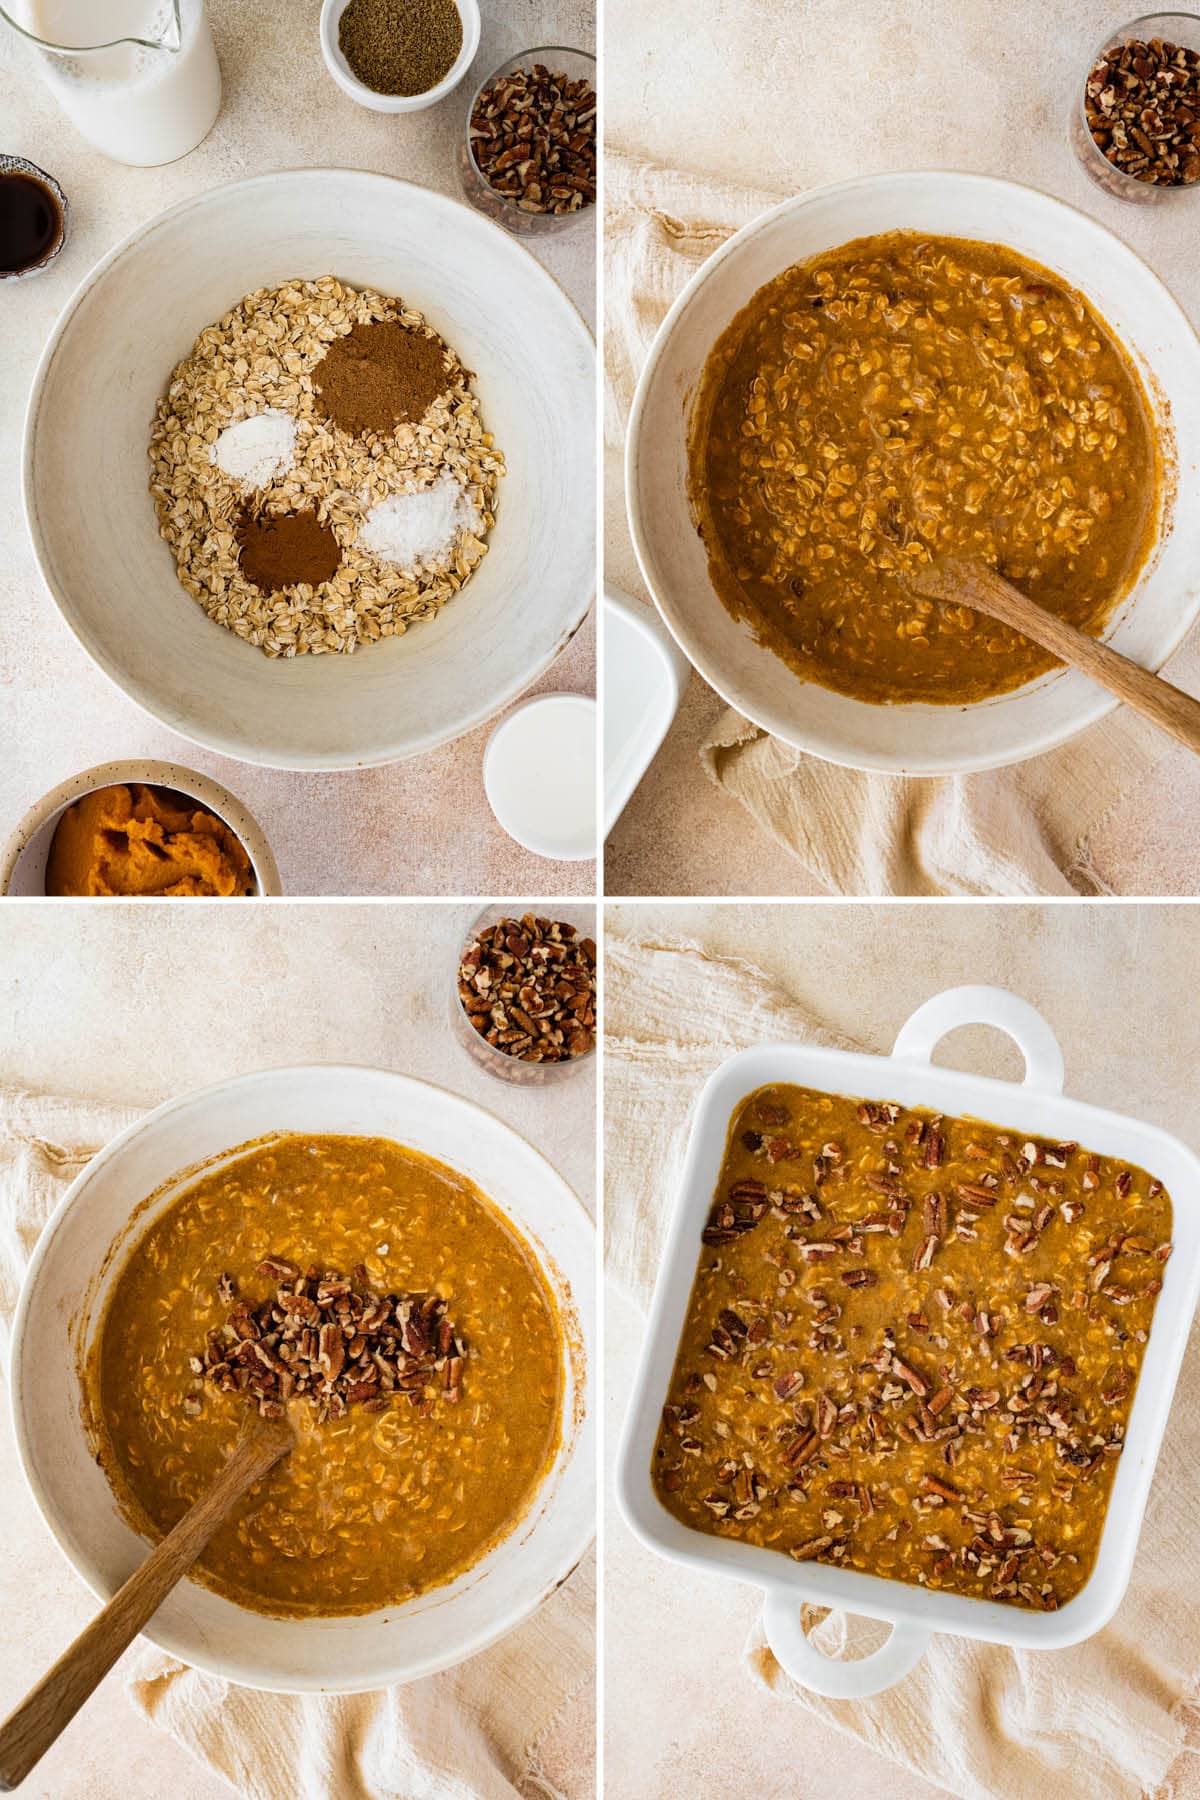 Collage of four photos showing the steps to make Pumpkin Baked Oatmeal: mixing the dry and wet ingredients, adding pecans and then pouring into a baking dish and topping with more pecans.